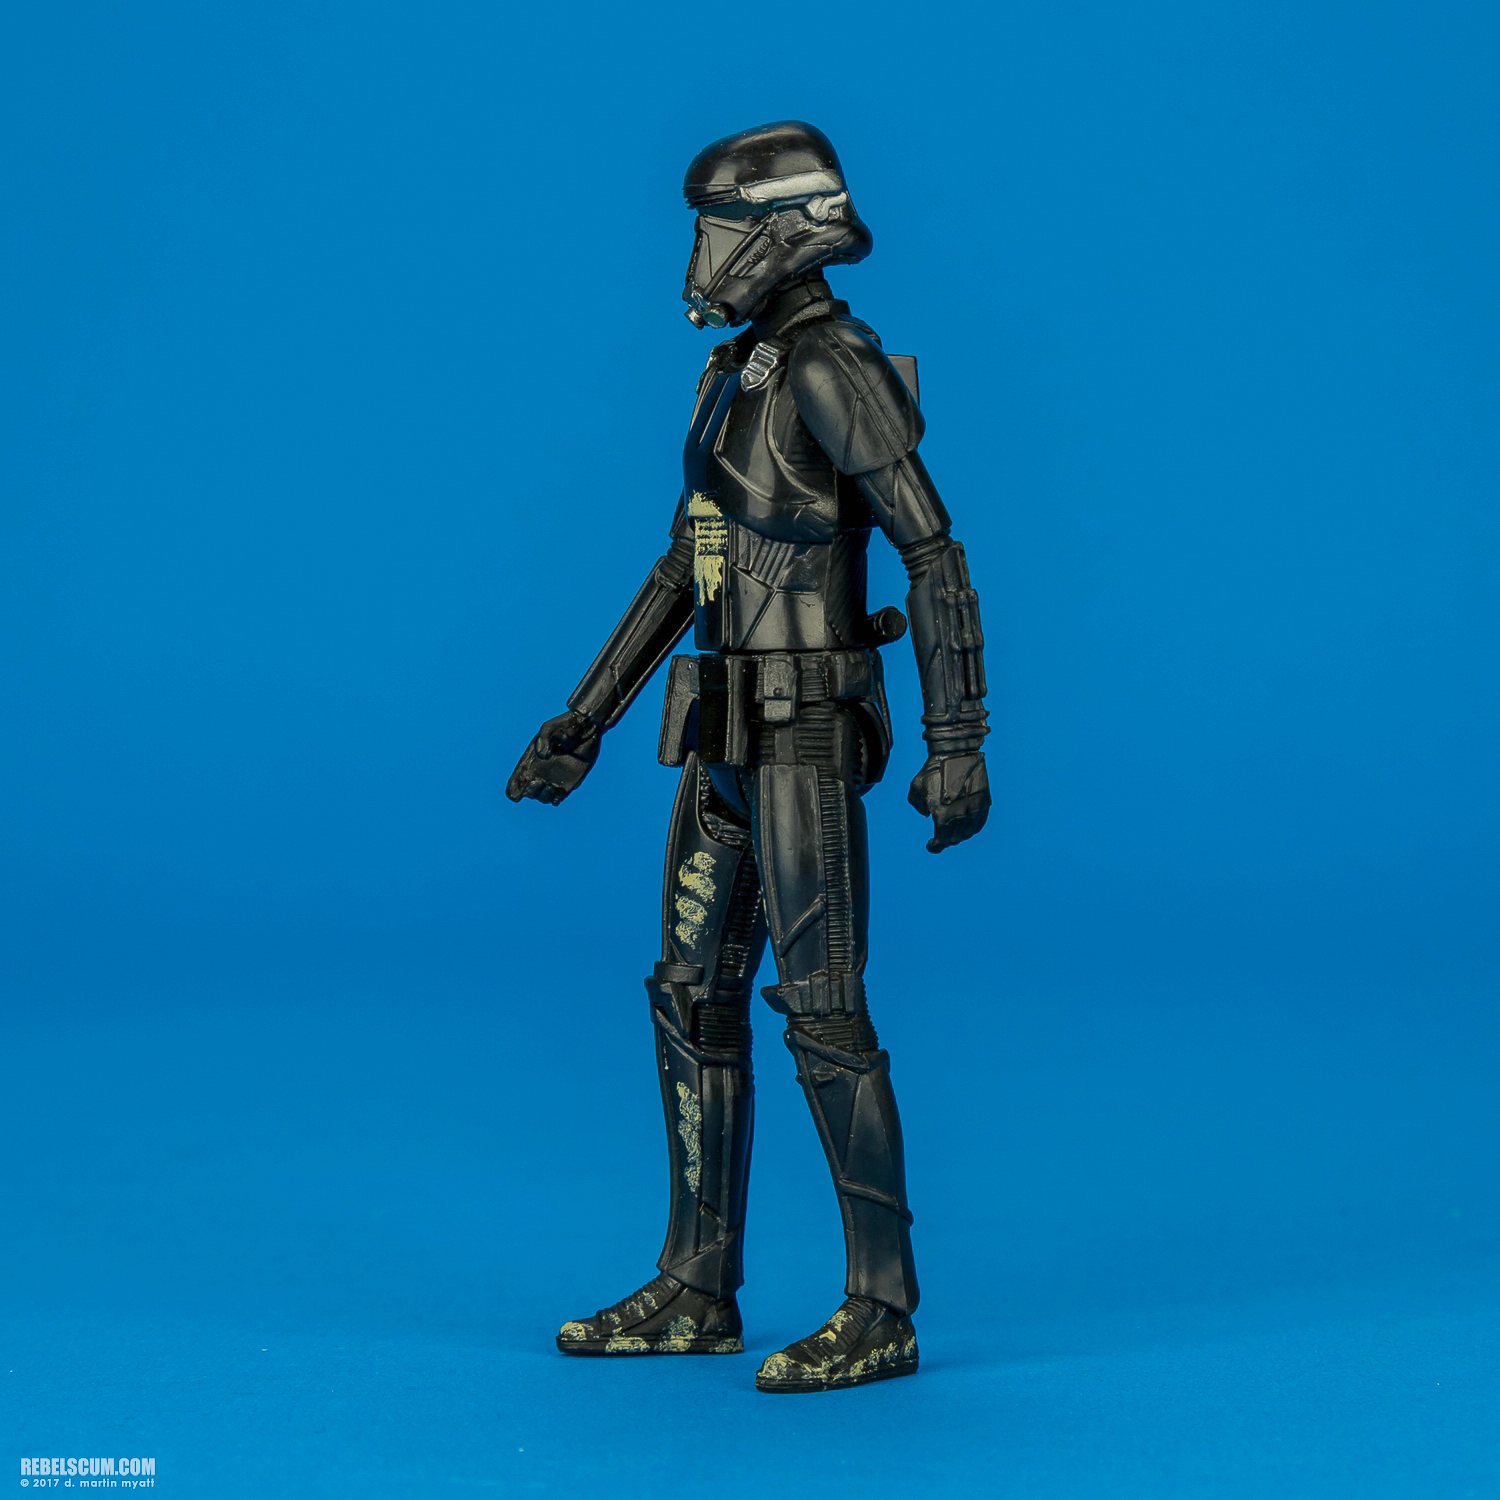 Kohls-Exclusive-Four-Pack-Rogue-One-B9605-003.jpg